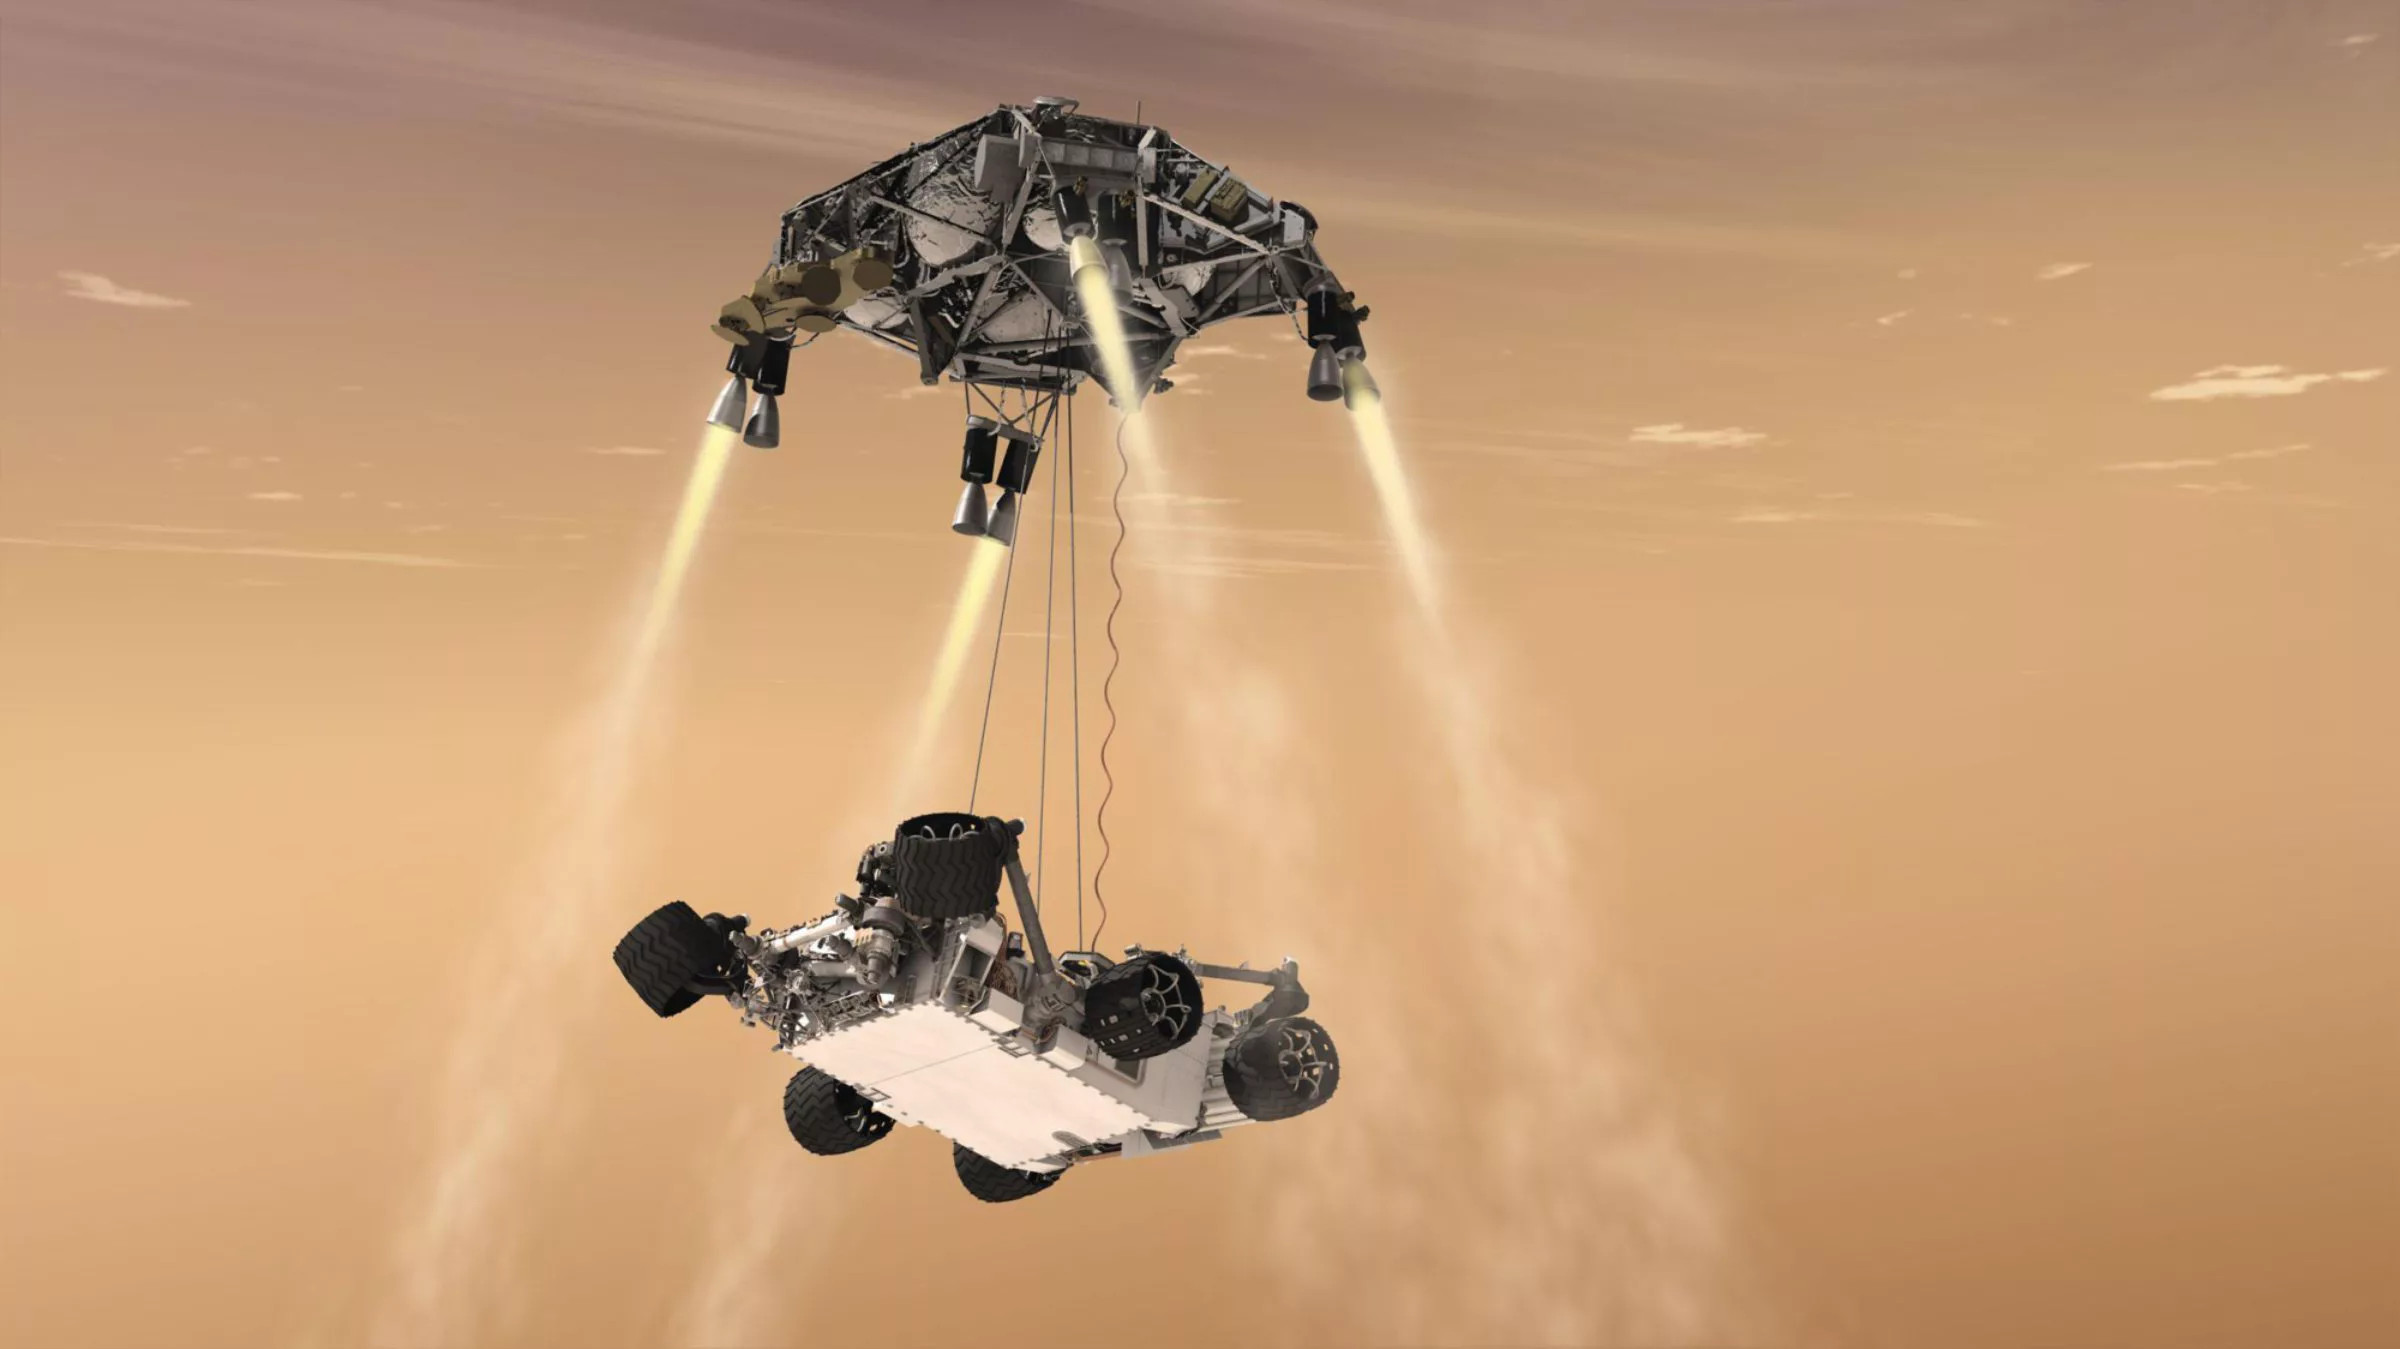 You are currently viewing Curiosity’s skycrane maneuver